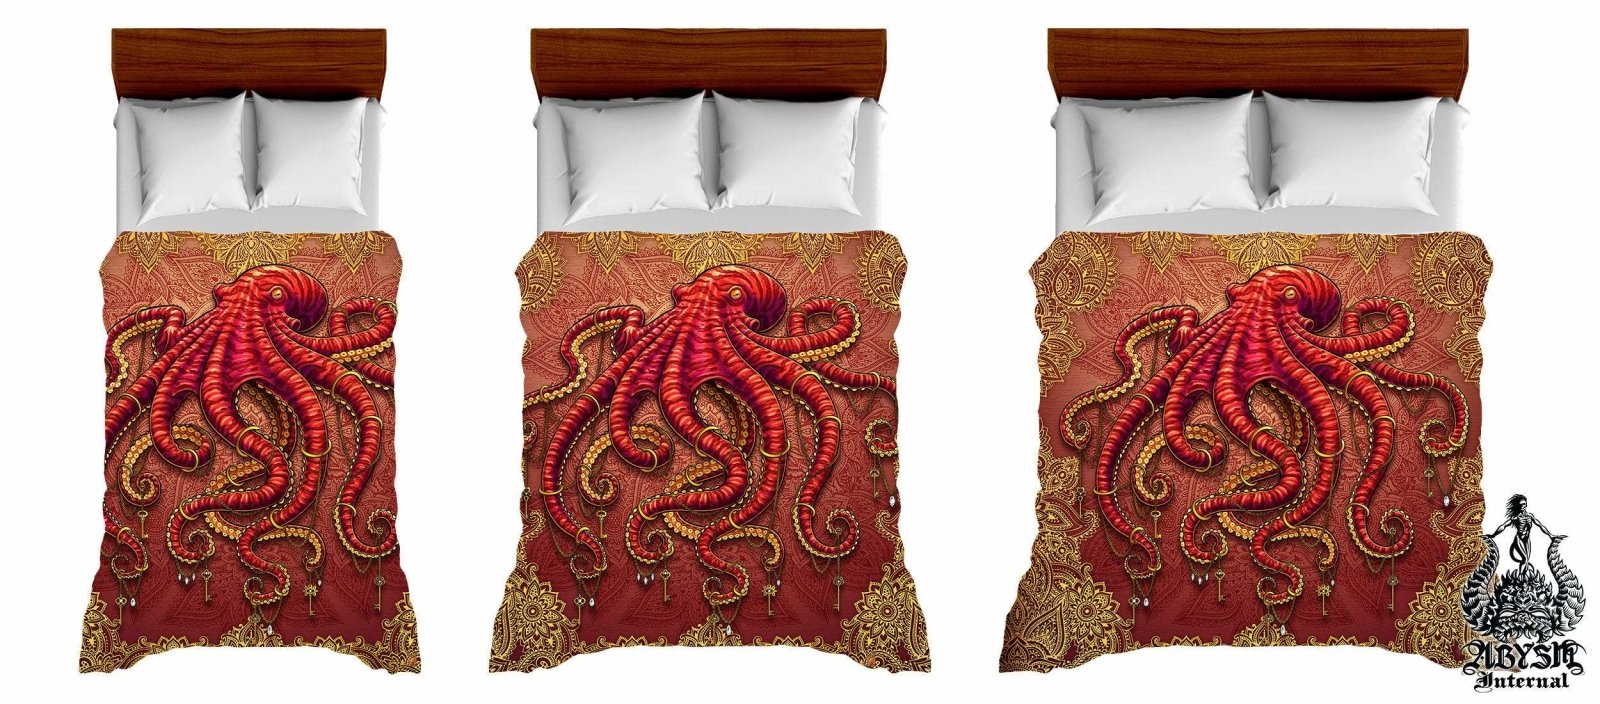 Boho Bedding Set, Comforter and Duvet, Beach Bed Cover, Coastal Bedroom Decor, King, Queen and Twin Size - Octopus - Abysm Internal